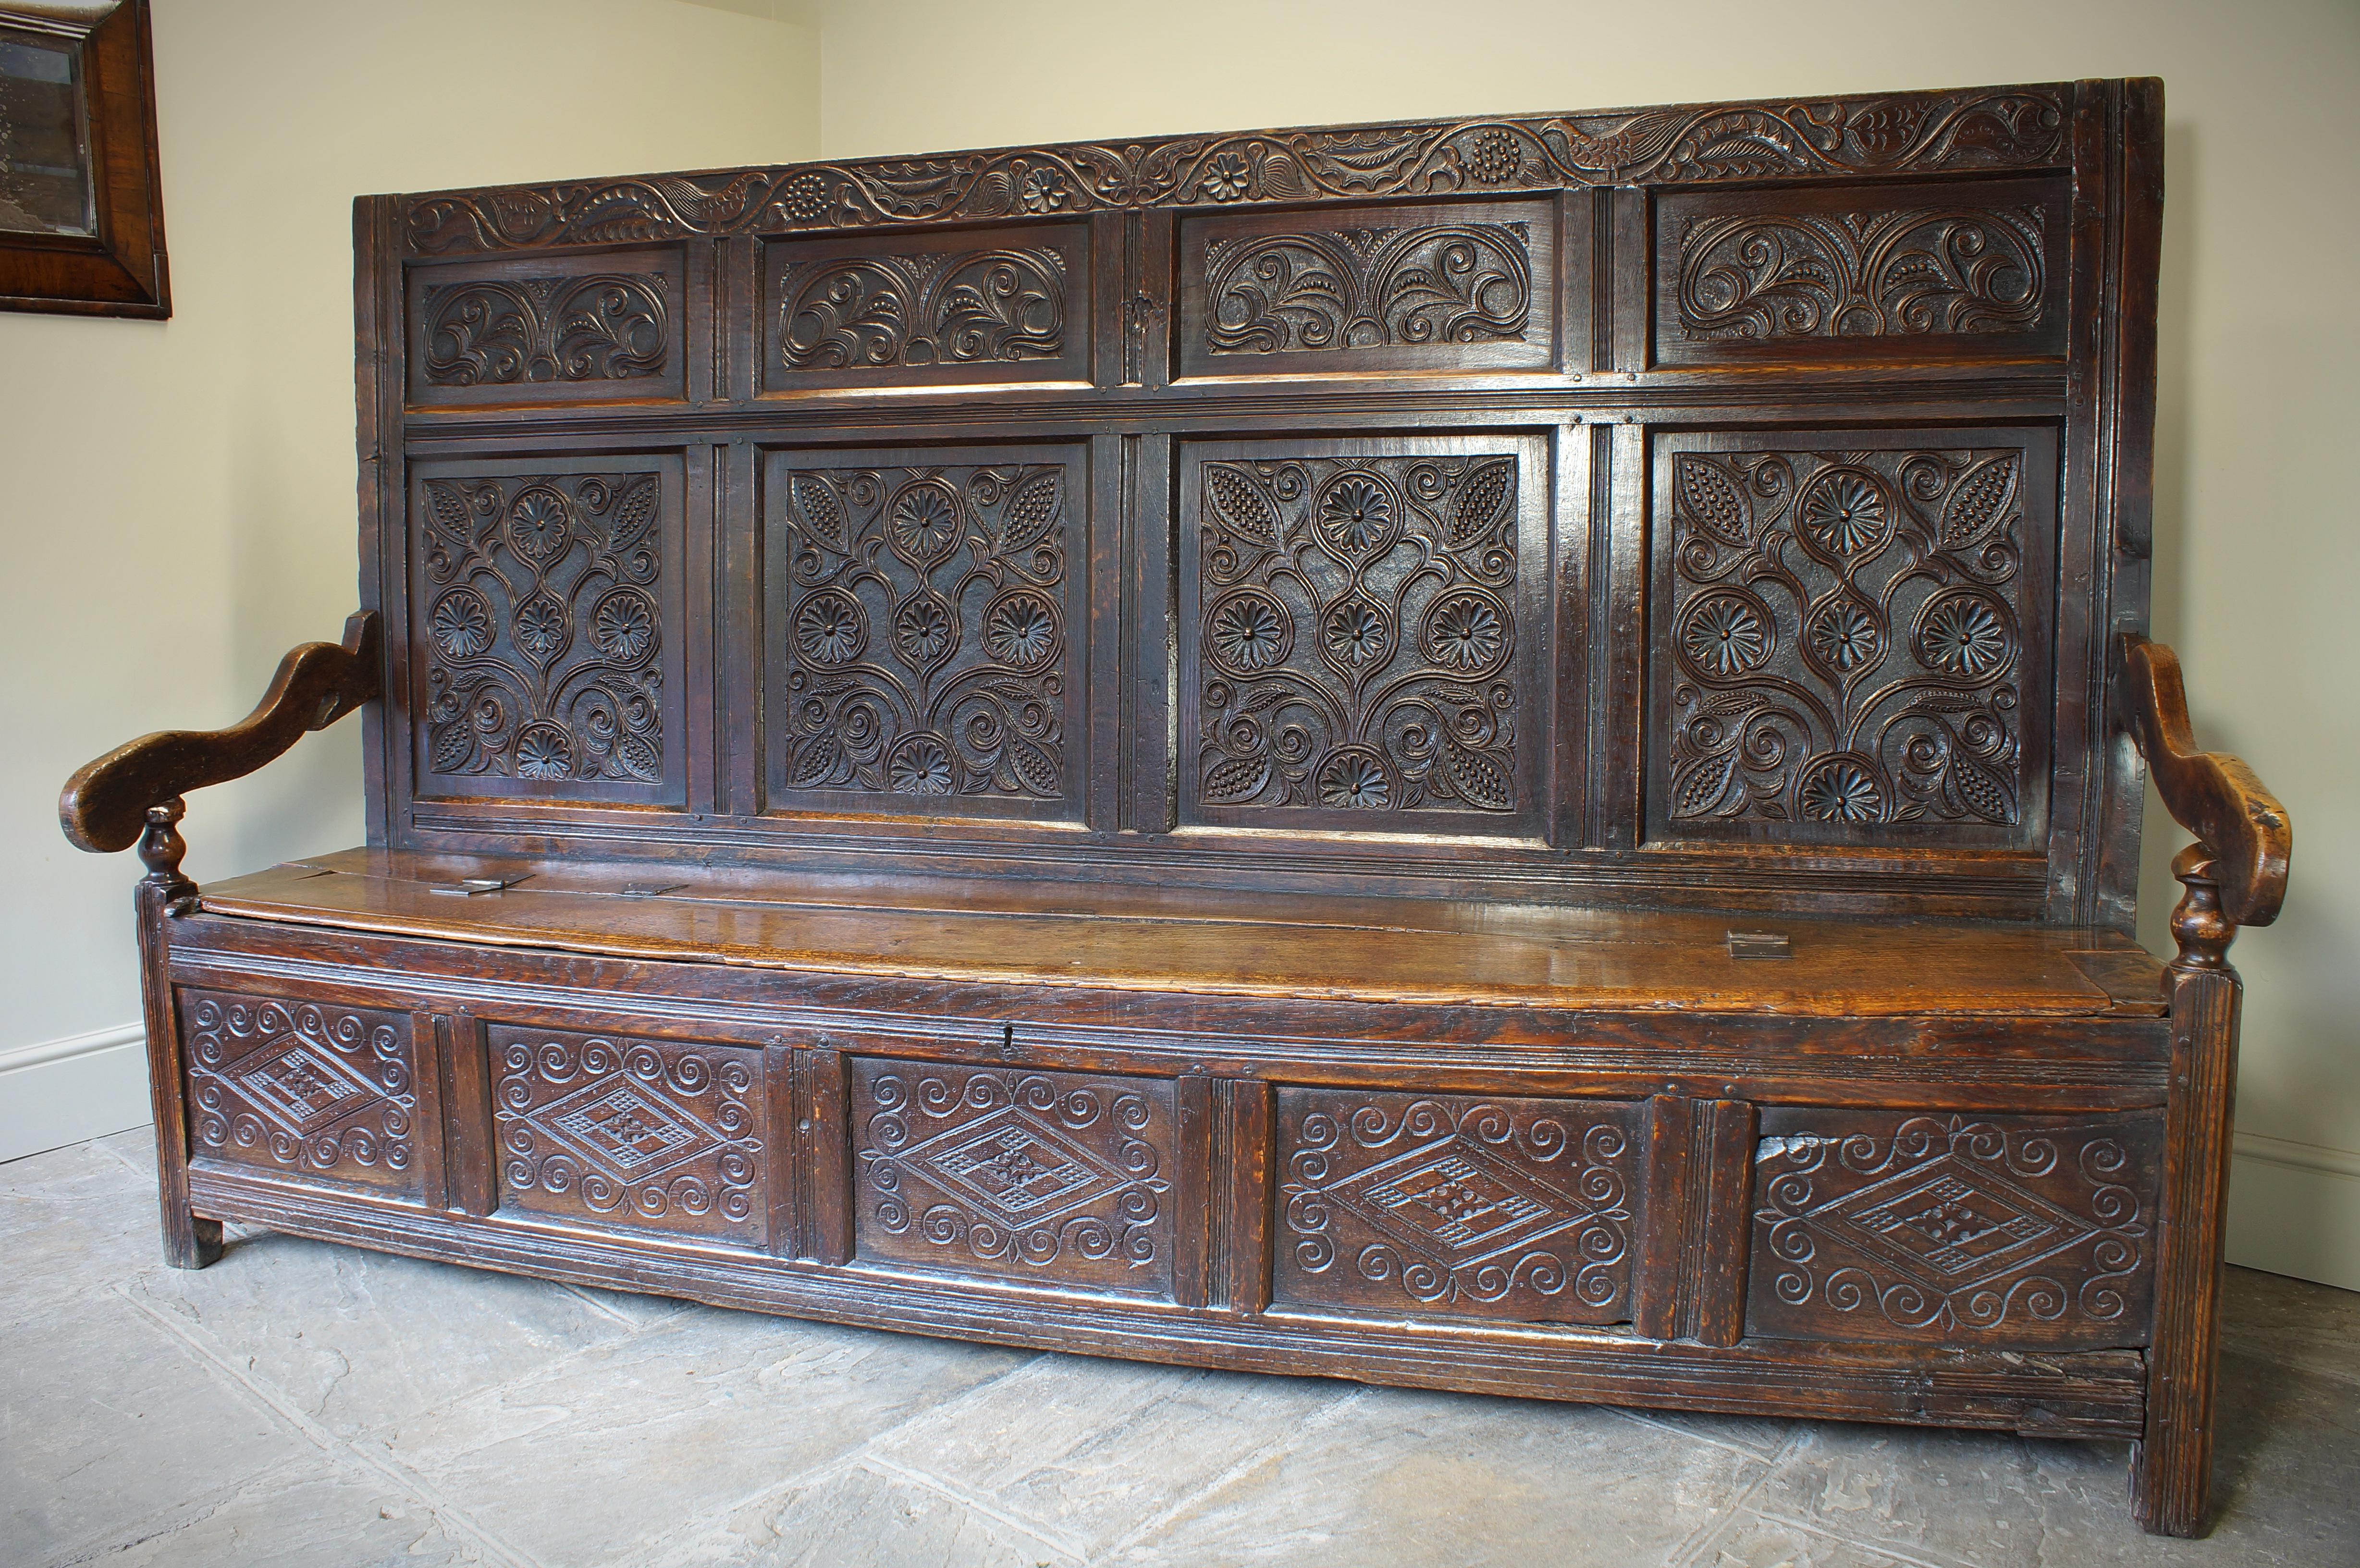 Charles II An Exceptional 17th Century English Oak Carved Box Settle.